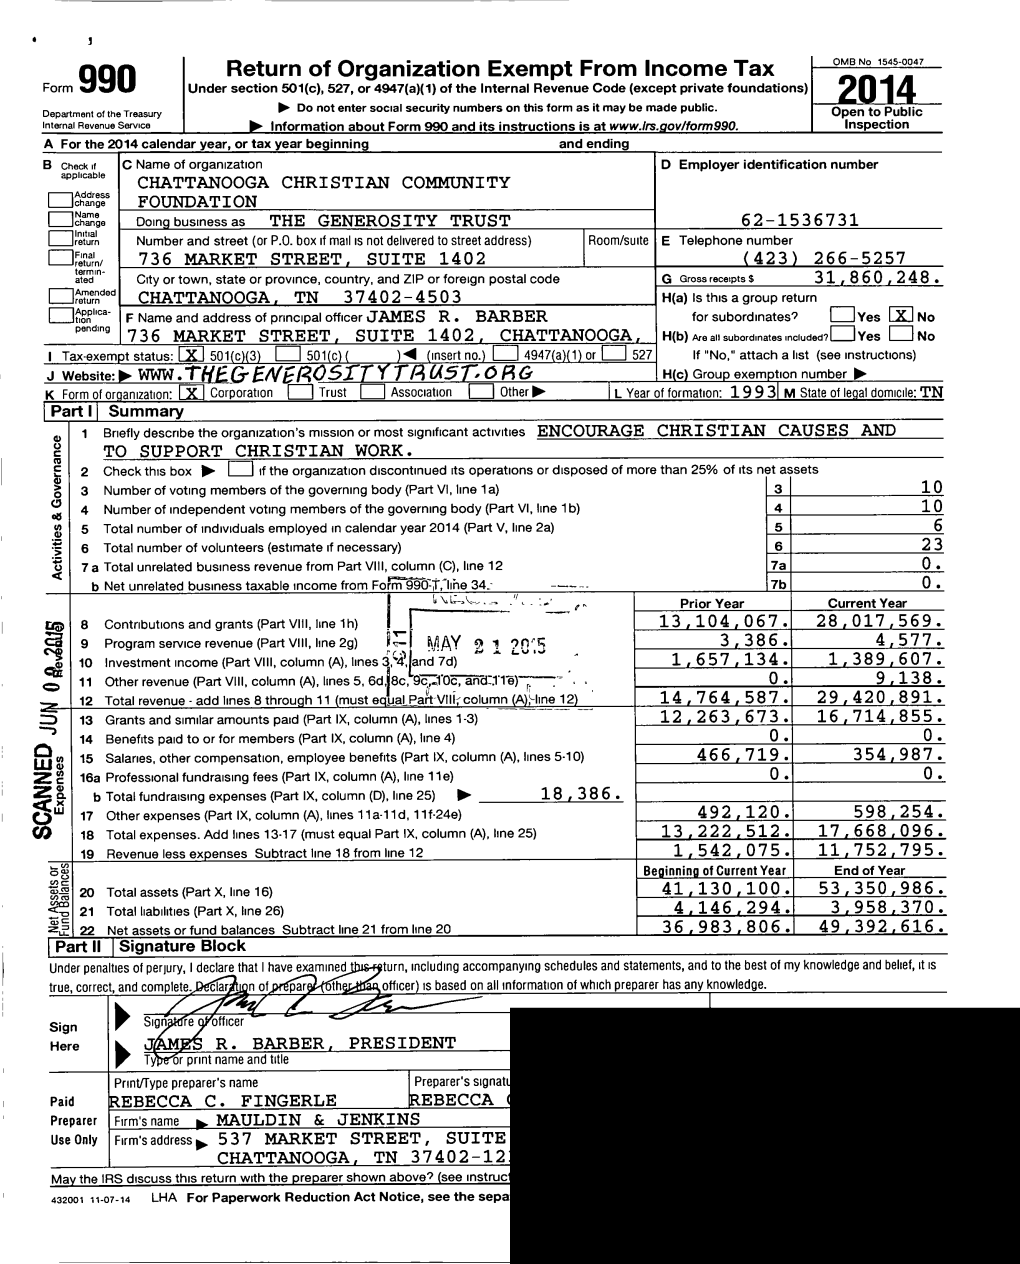 Return of Organization Exempt from Income Tax VMUNO , .Thegr ENER051